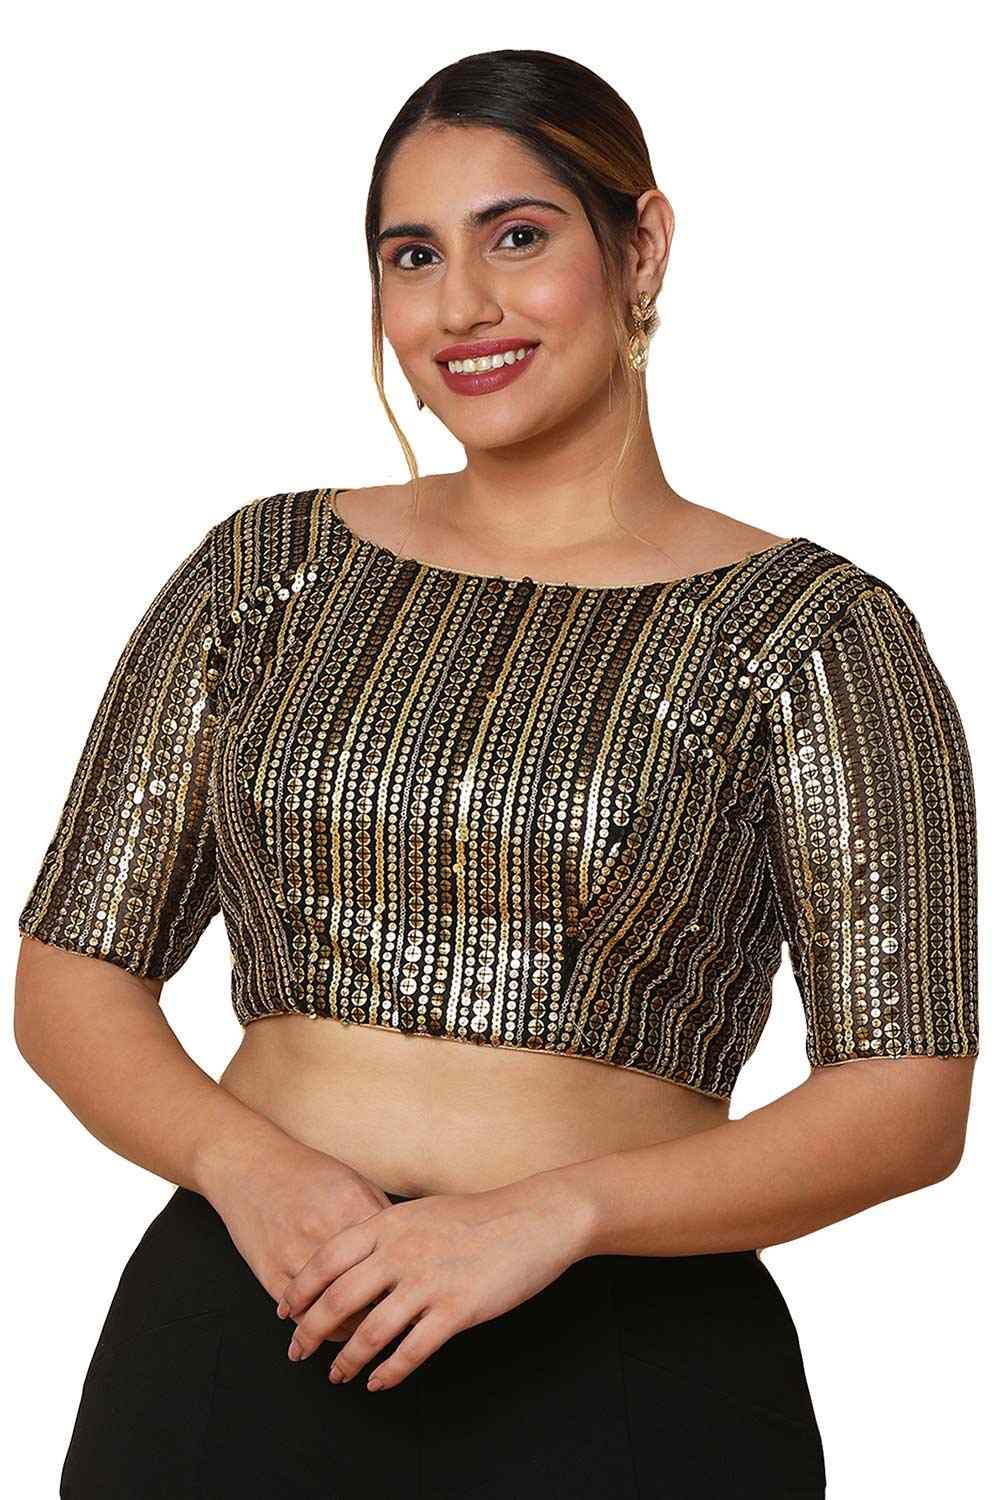 Buy Black Net Readymade Saree Blouse Online - One Minute Sareee